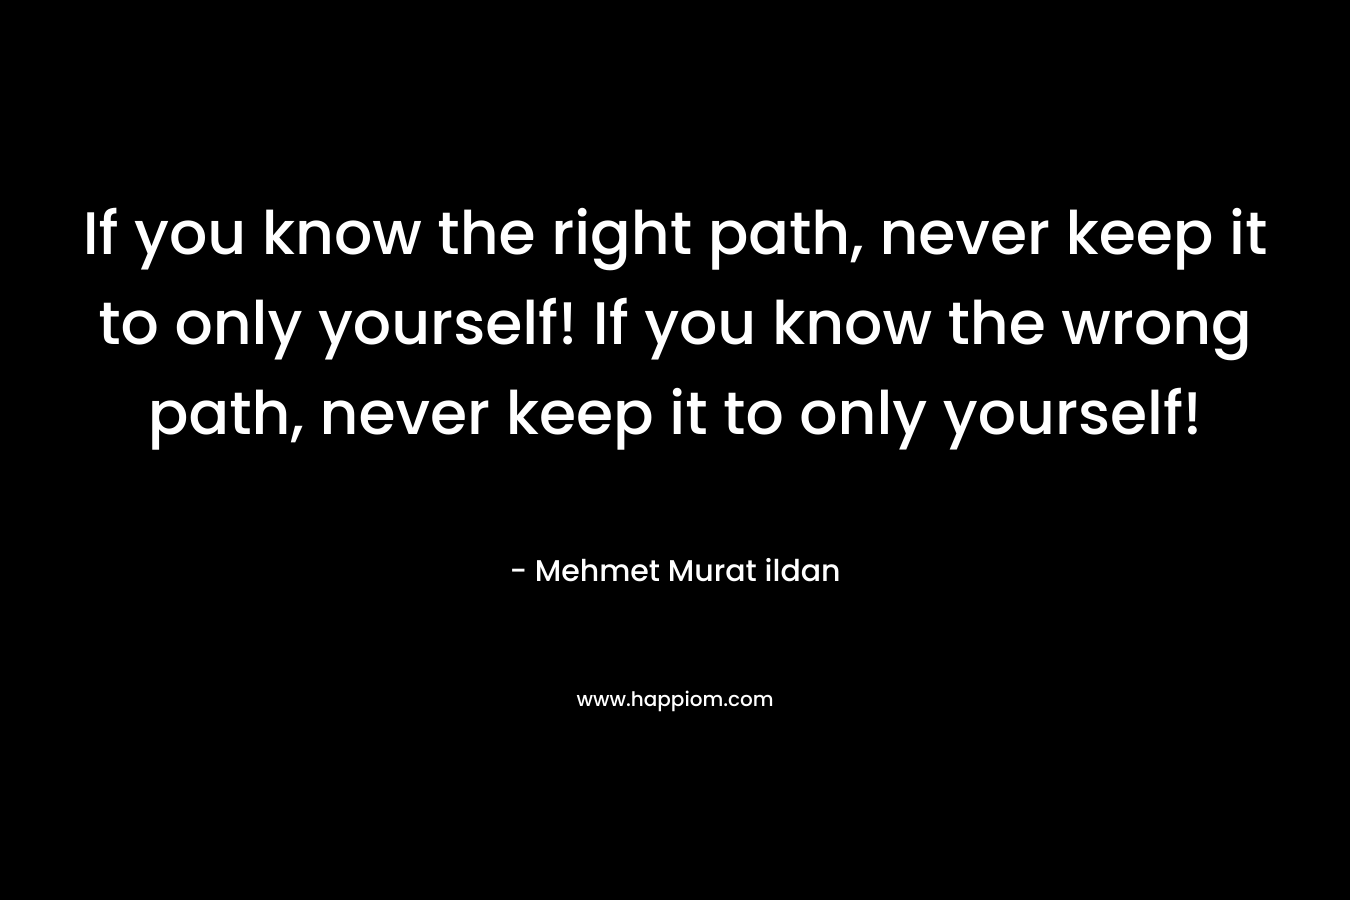 If you know the right path, never keep it to only yourself! If you know the wrong path, never keep it to only yourself!